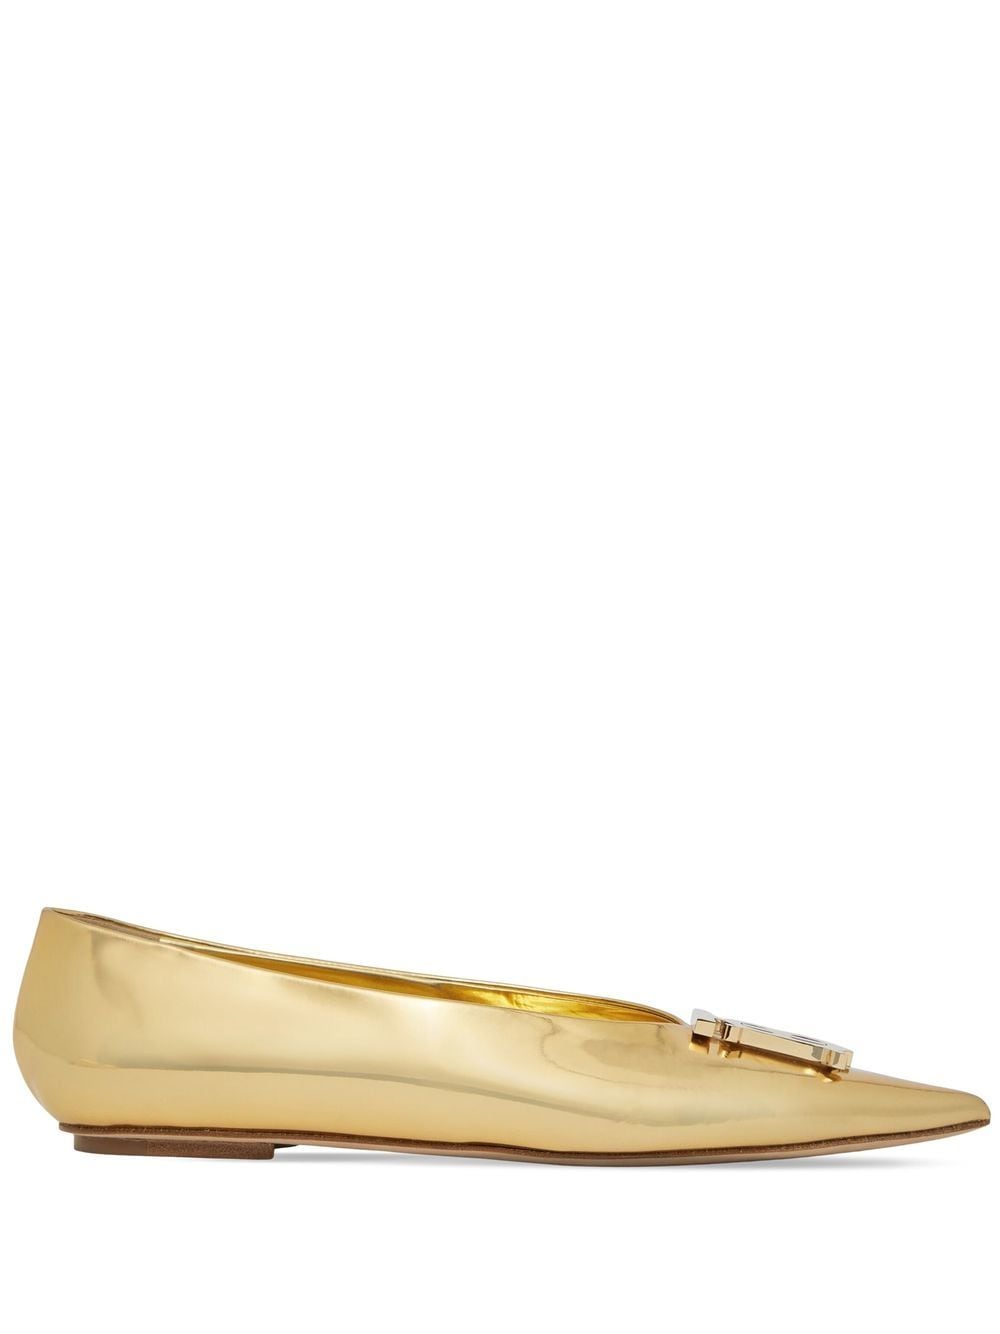 Burberry logo-plaque pointed ballerina shoes - Gold von Burberry